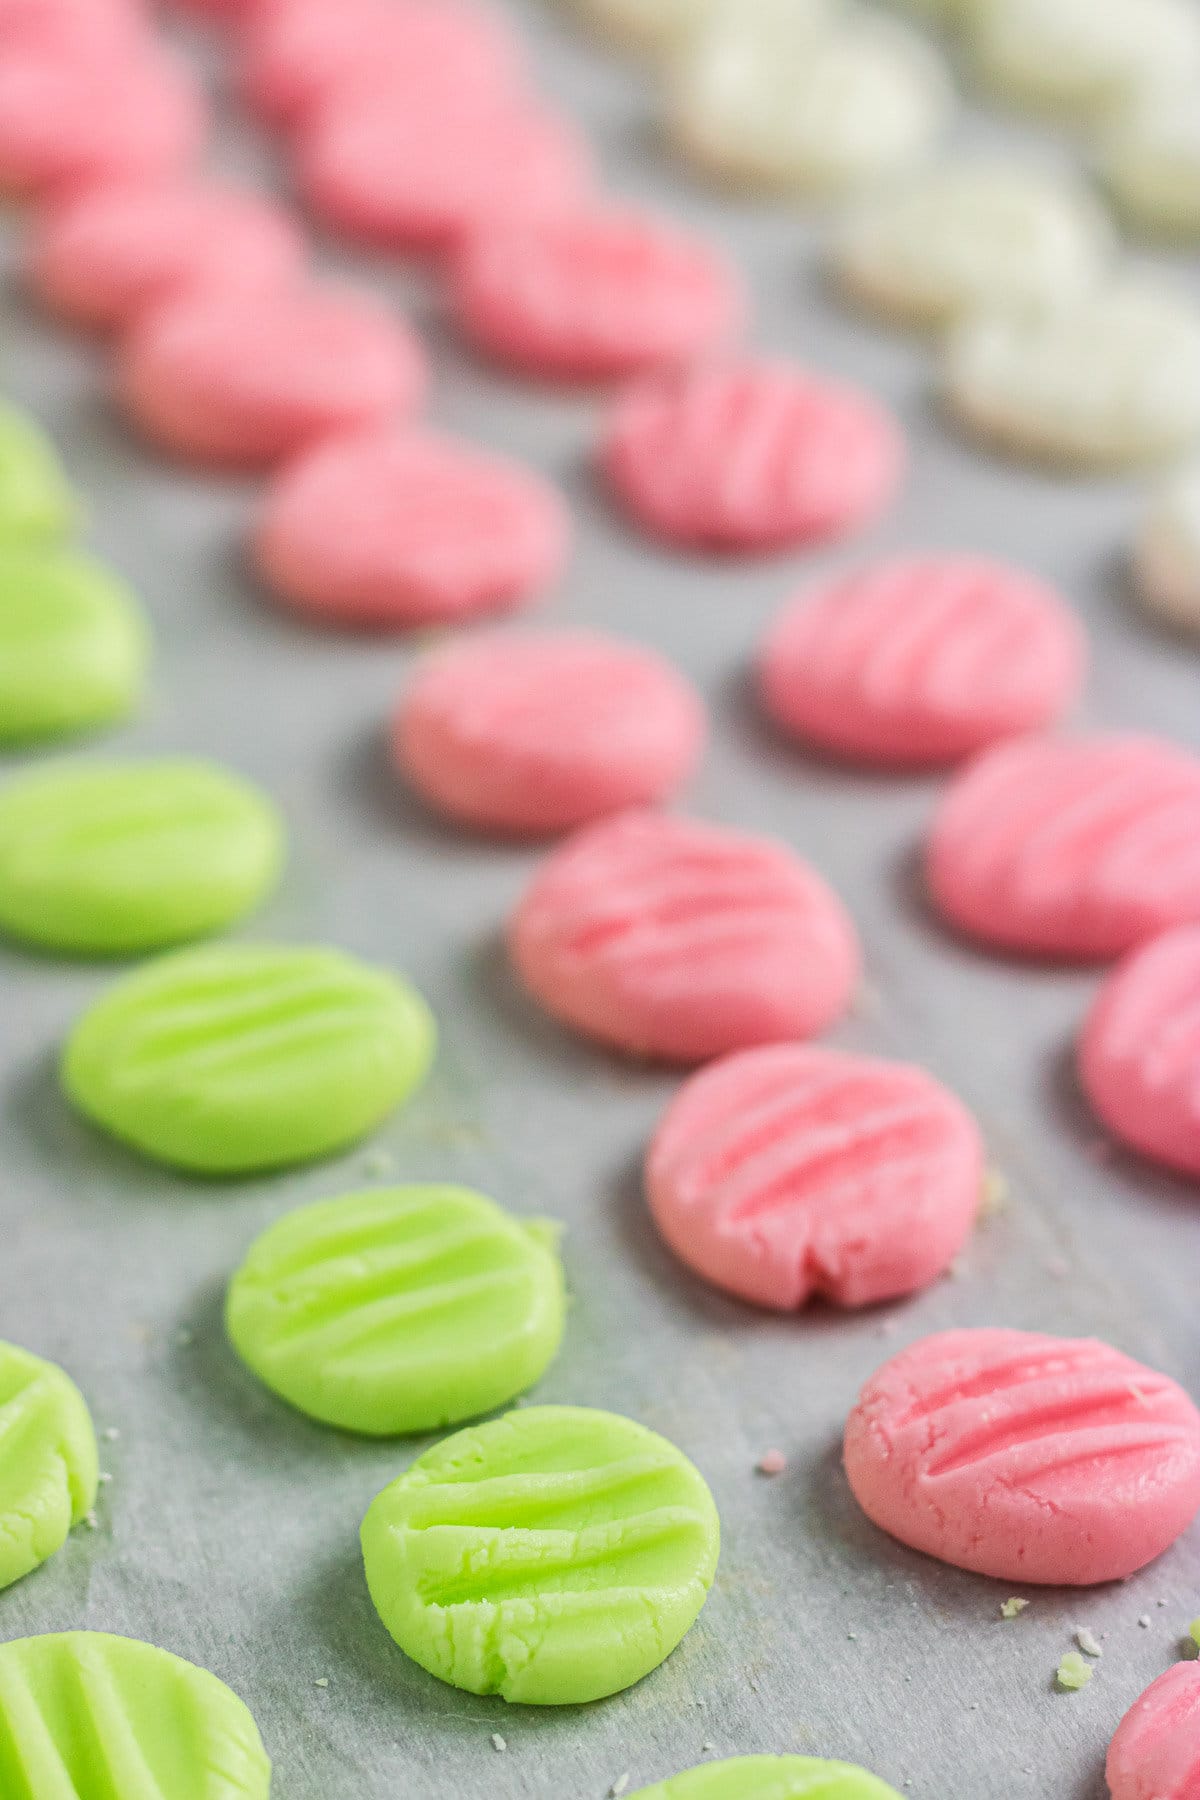 An up-close photo of green and pink mints on parchment paper.